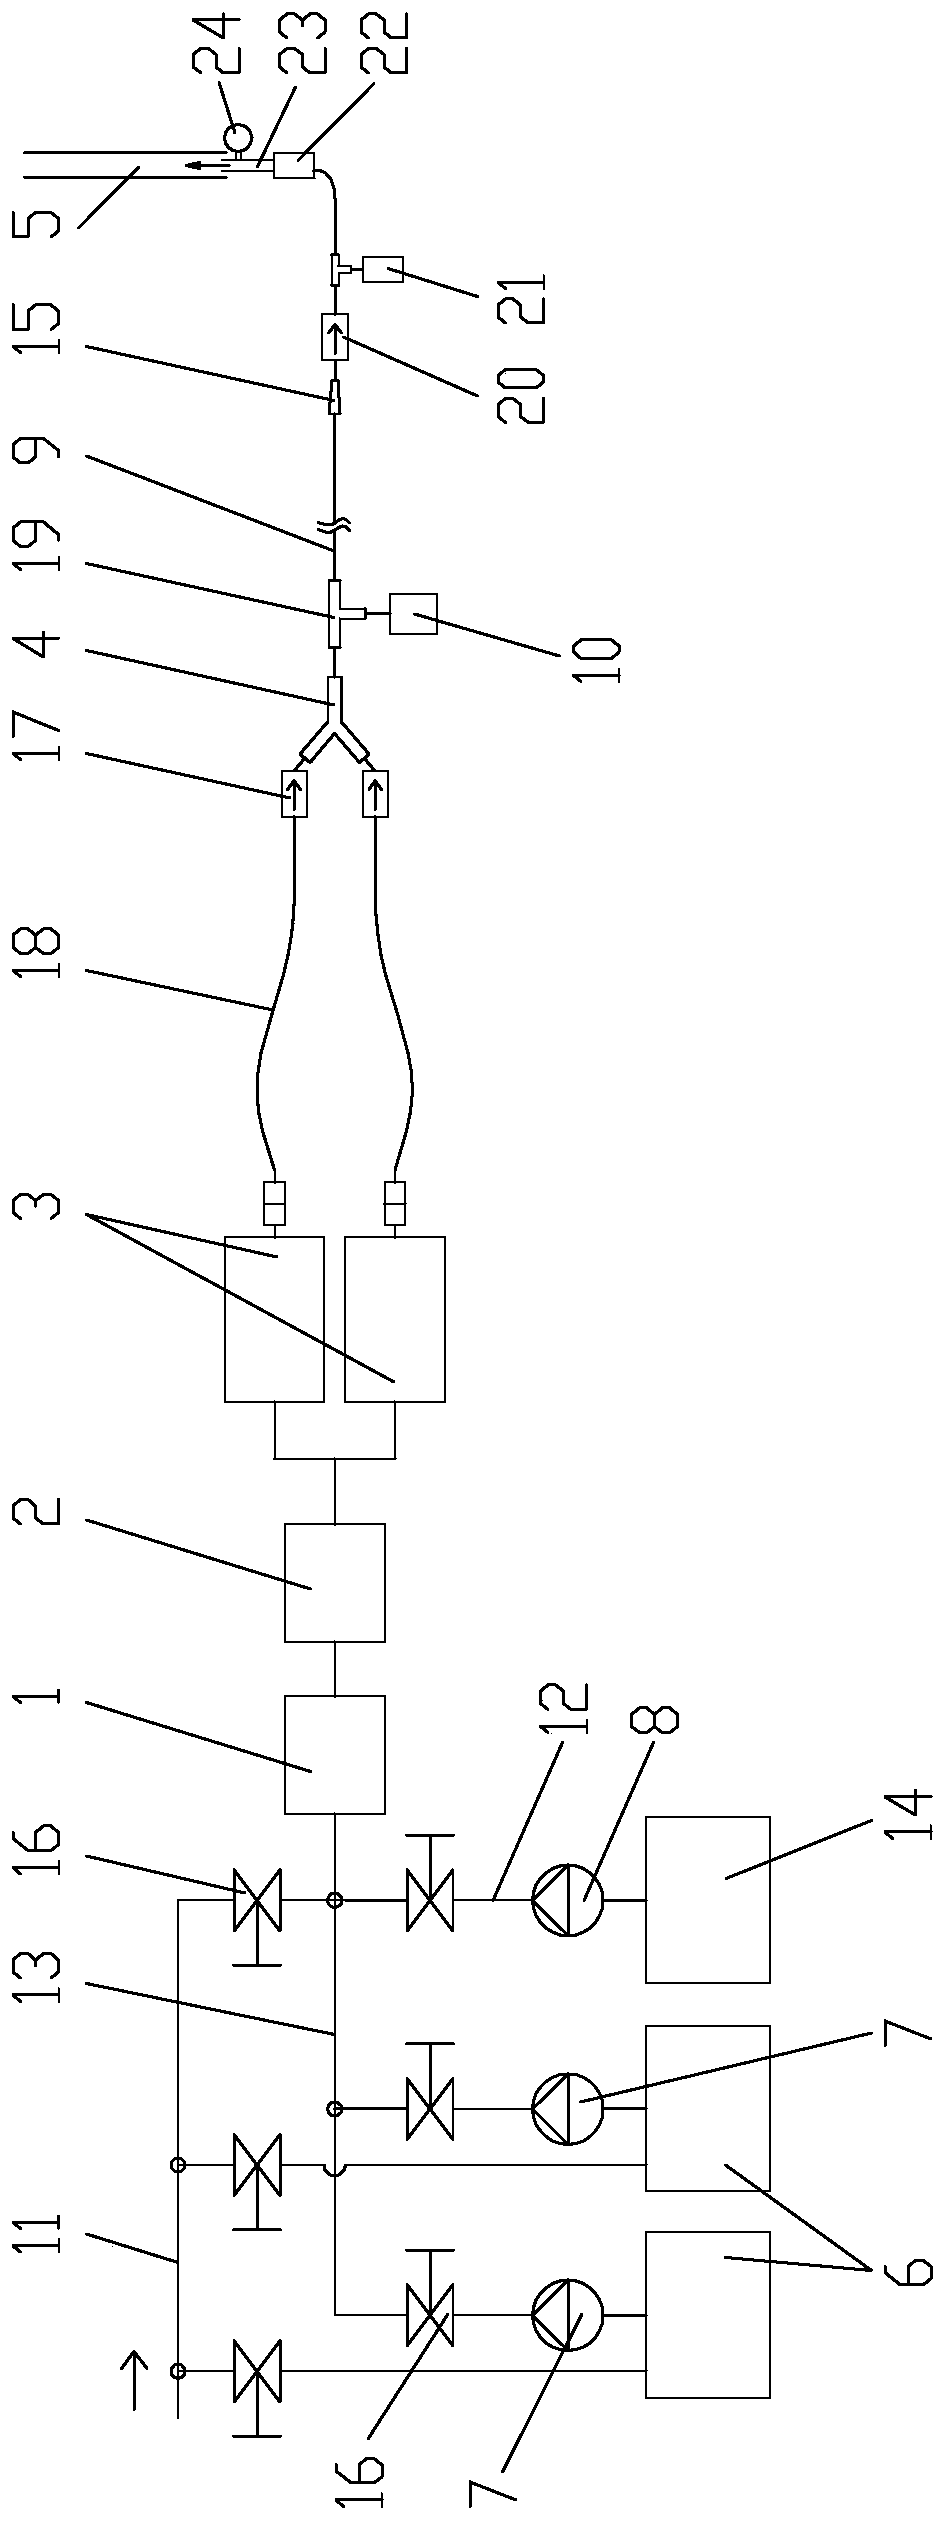 Underground coal mine hydraulic sand fracturing system and method